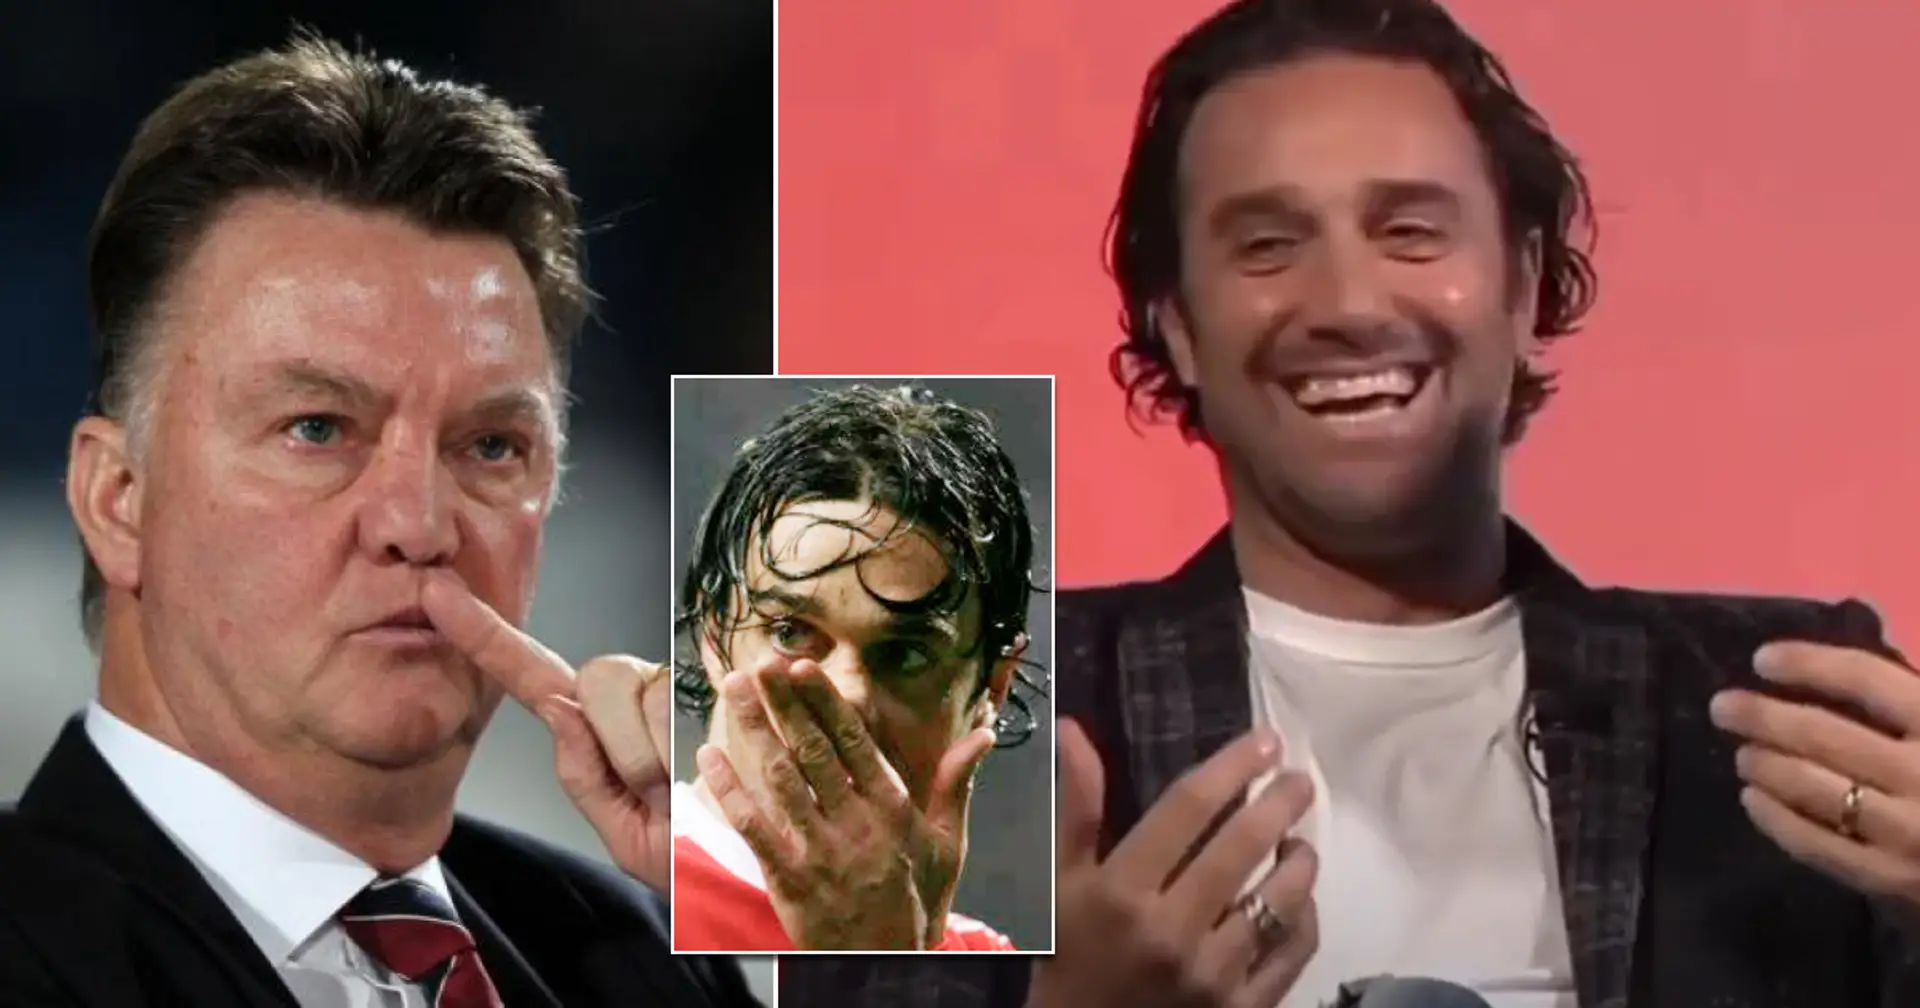 Luca Toni on 'football dictator' Louis van Gaal: He took his pants down but we couldn't see the balls because of his big belly